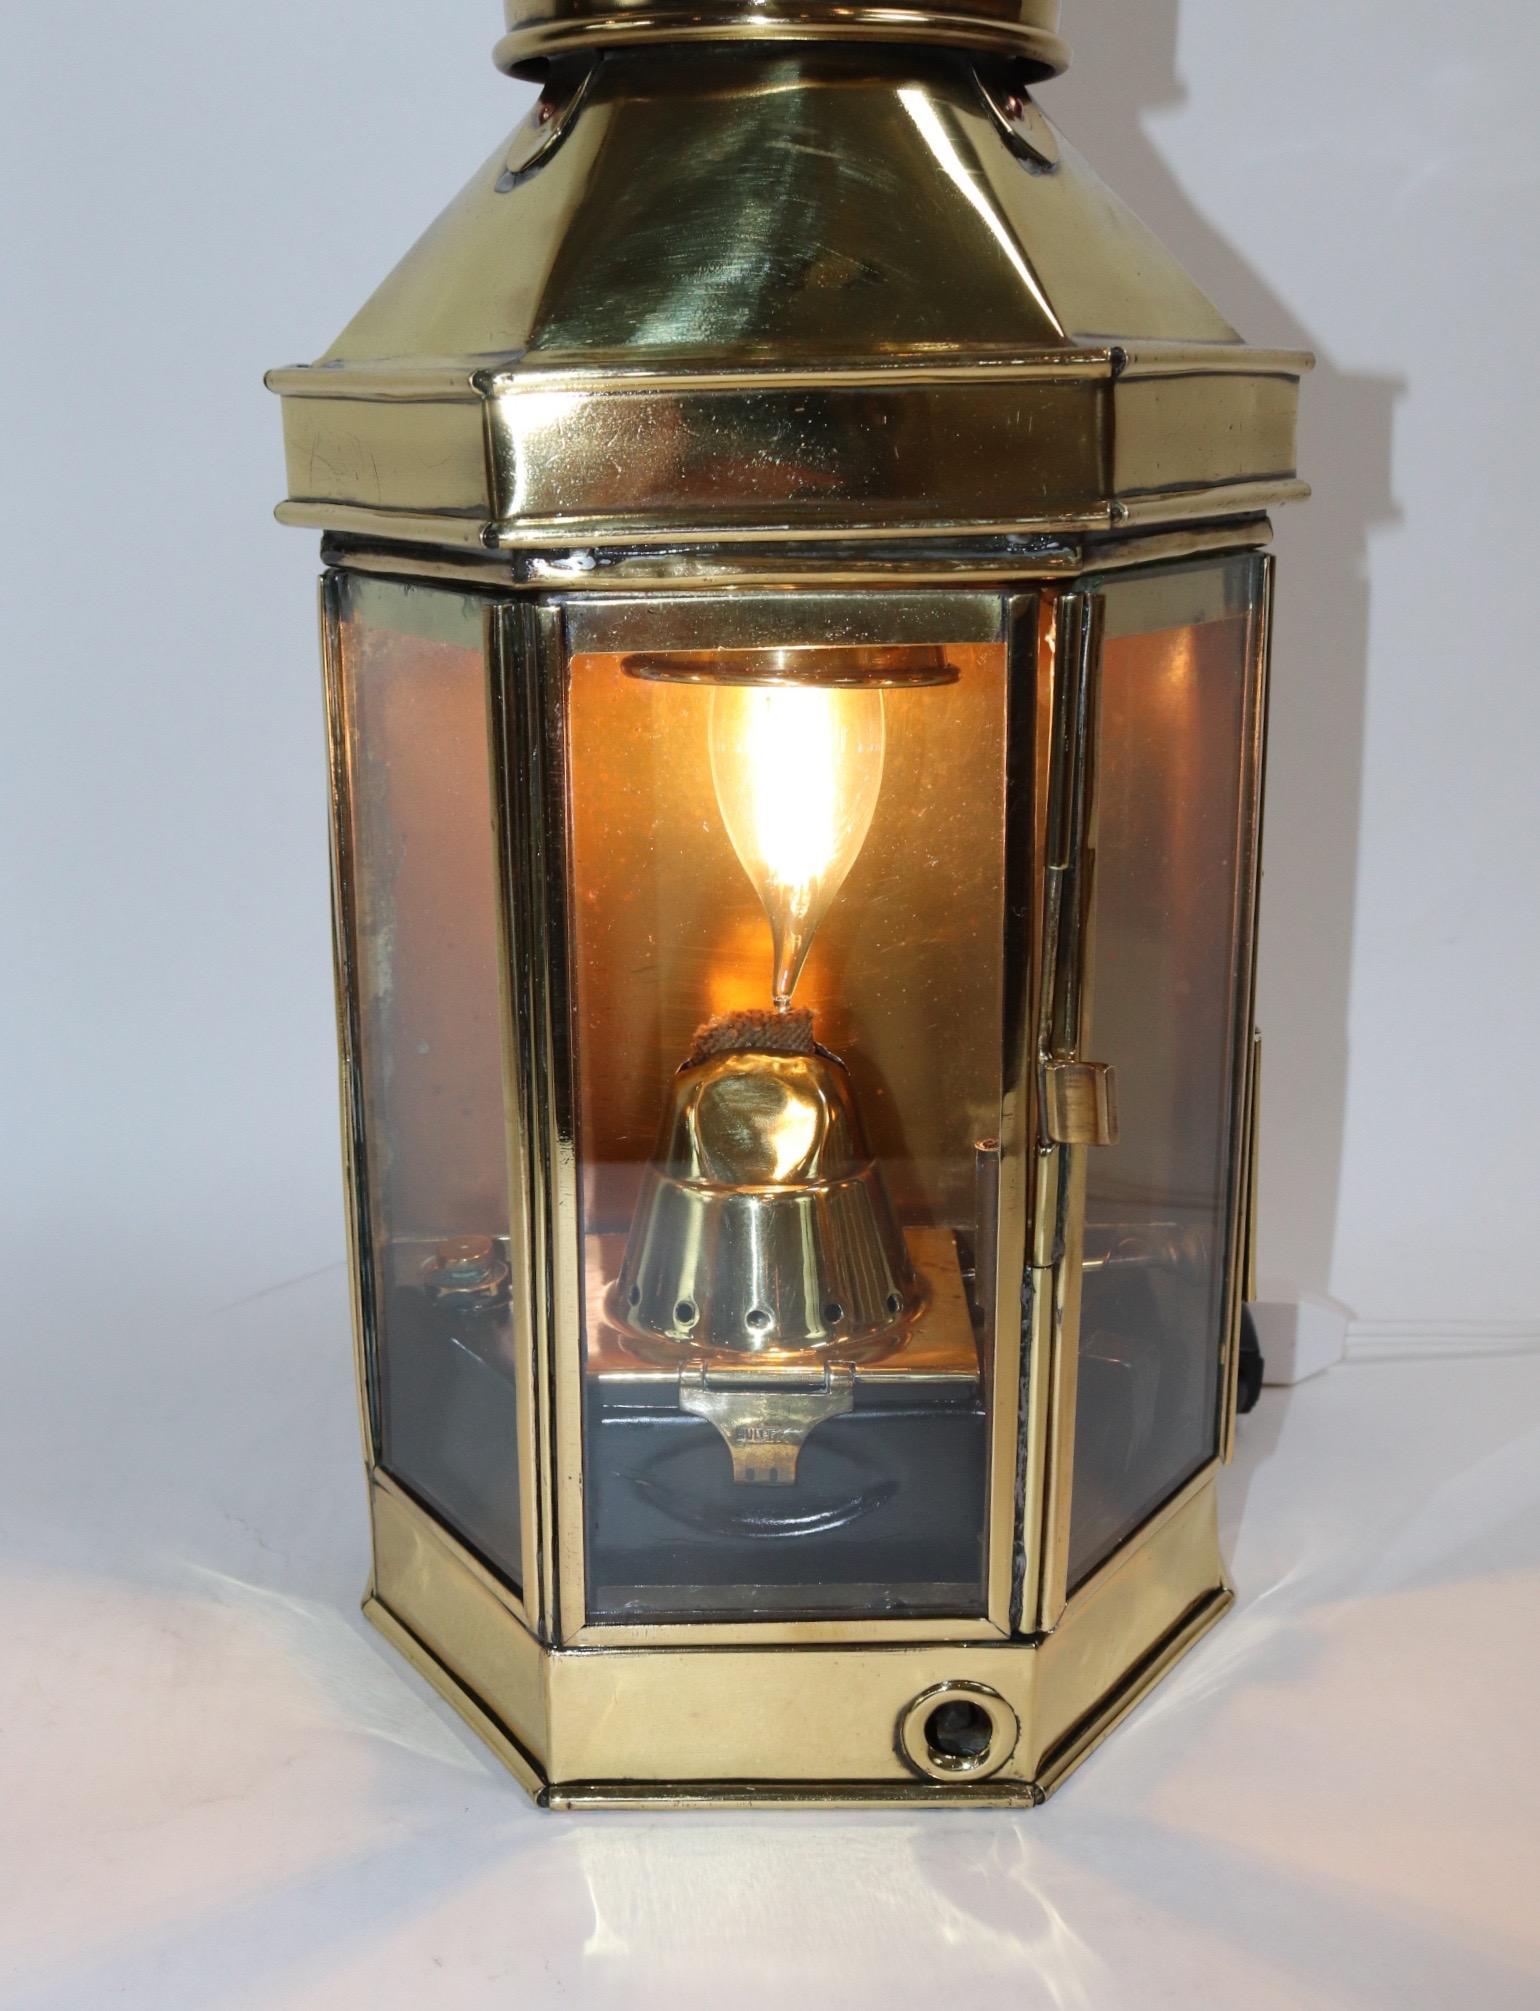 Solid brass yacht cabin lantern by English maker Bulpitt, dated 1942. With original burner, wood carry handle, hinged door, and wired for home display. Lantern has been meticulously polished and lacquered.

Overall dimensions: 16